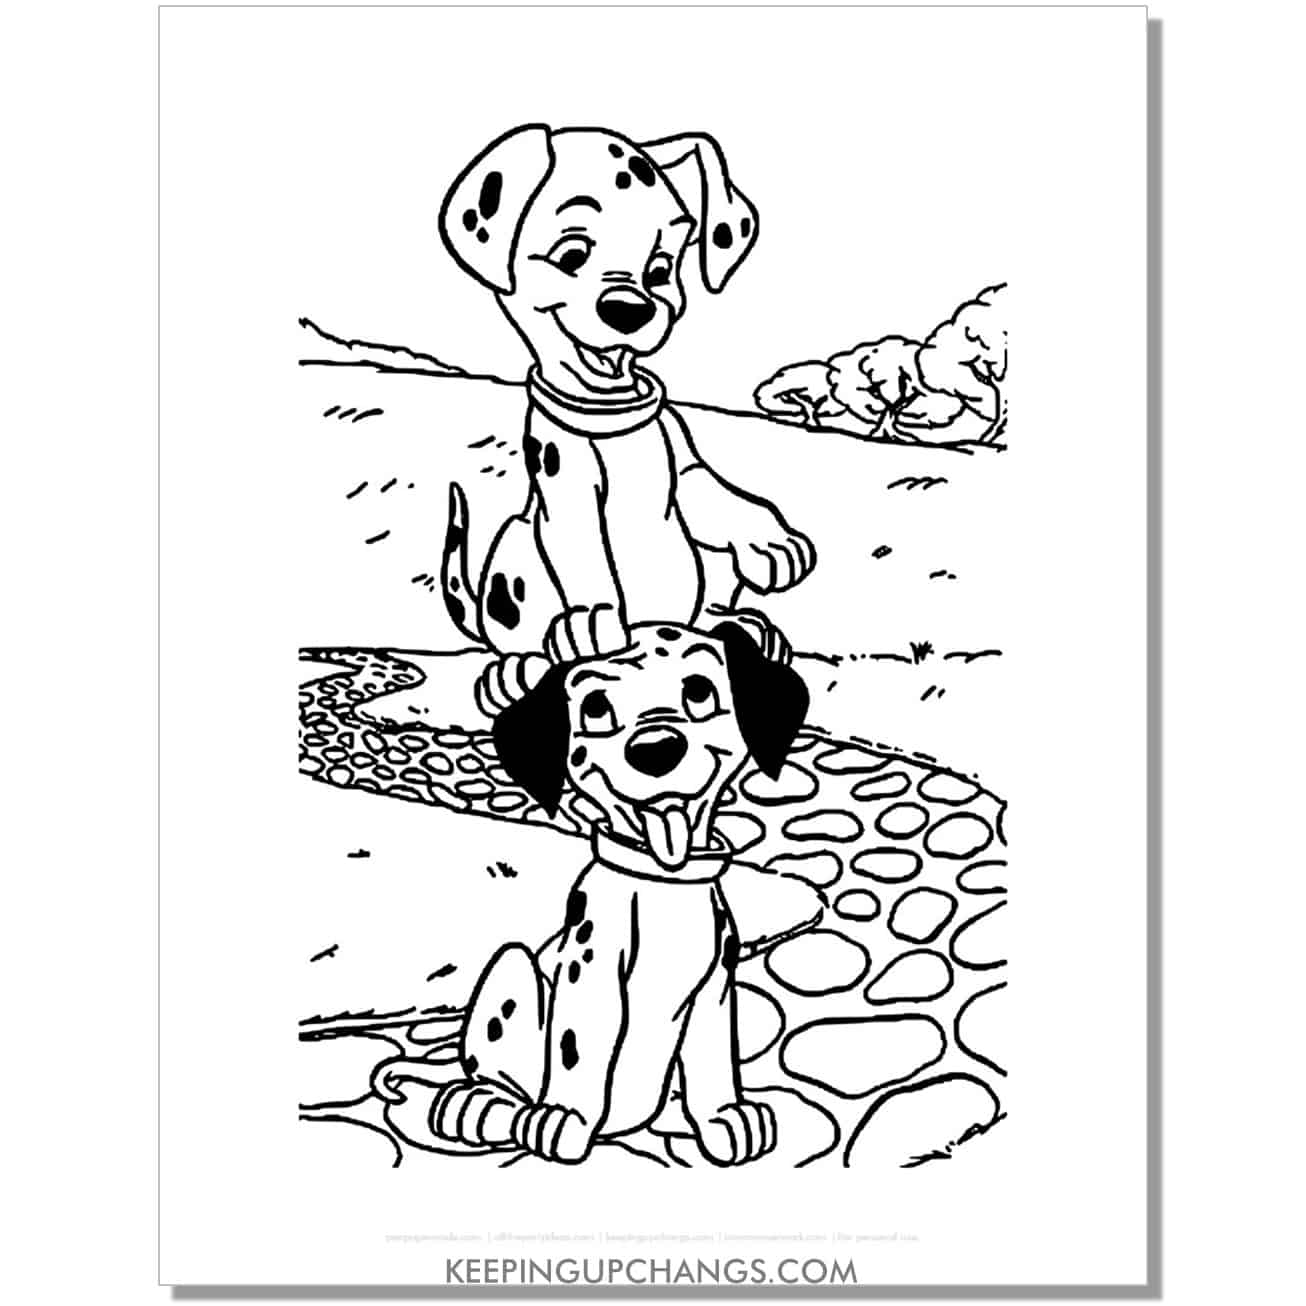 free rolly sitting on lucky's head 101 dalmations coloring page, sheet.